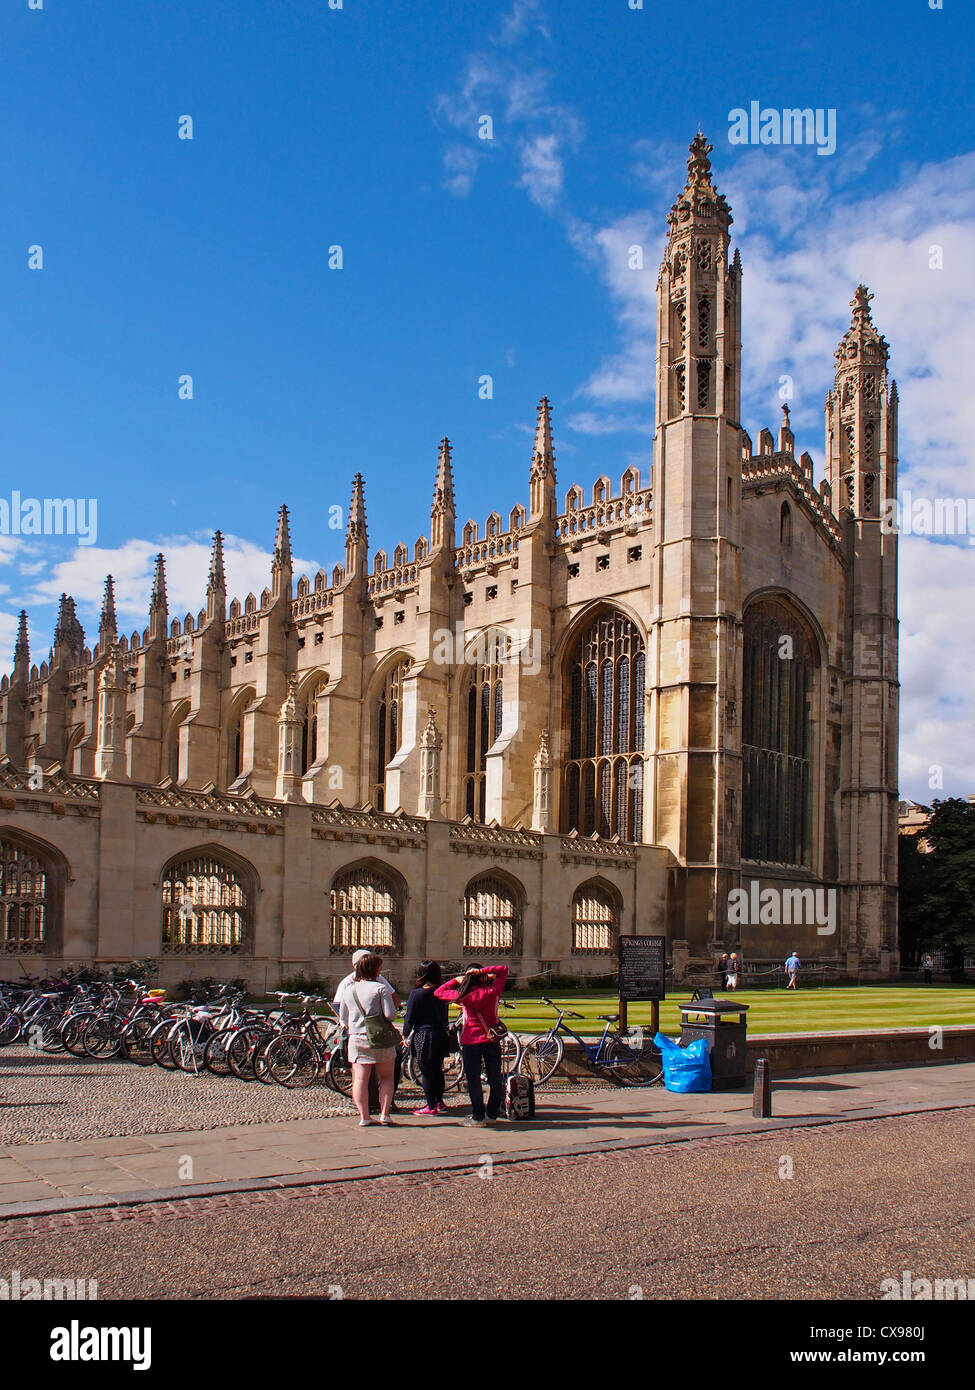 Portrait image of the front of Kings College Chapel Cambridge against blue autumn skies Stock Photo